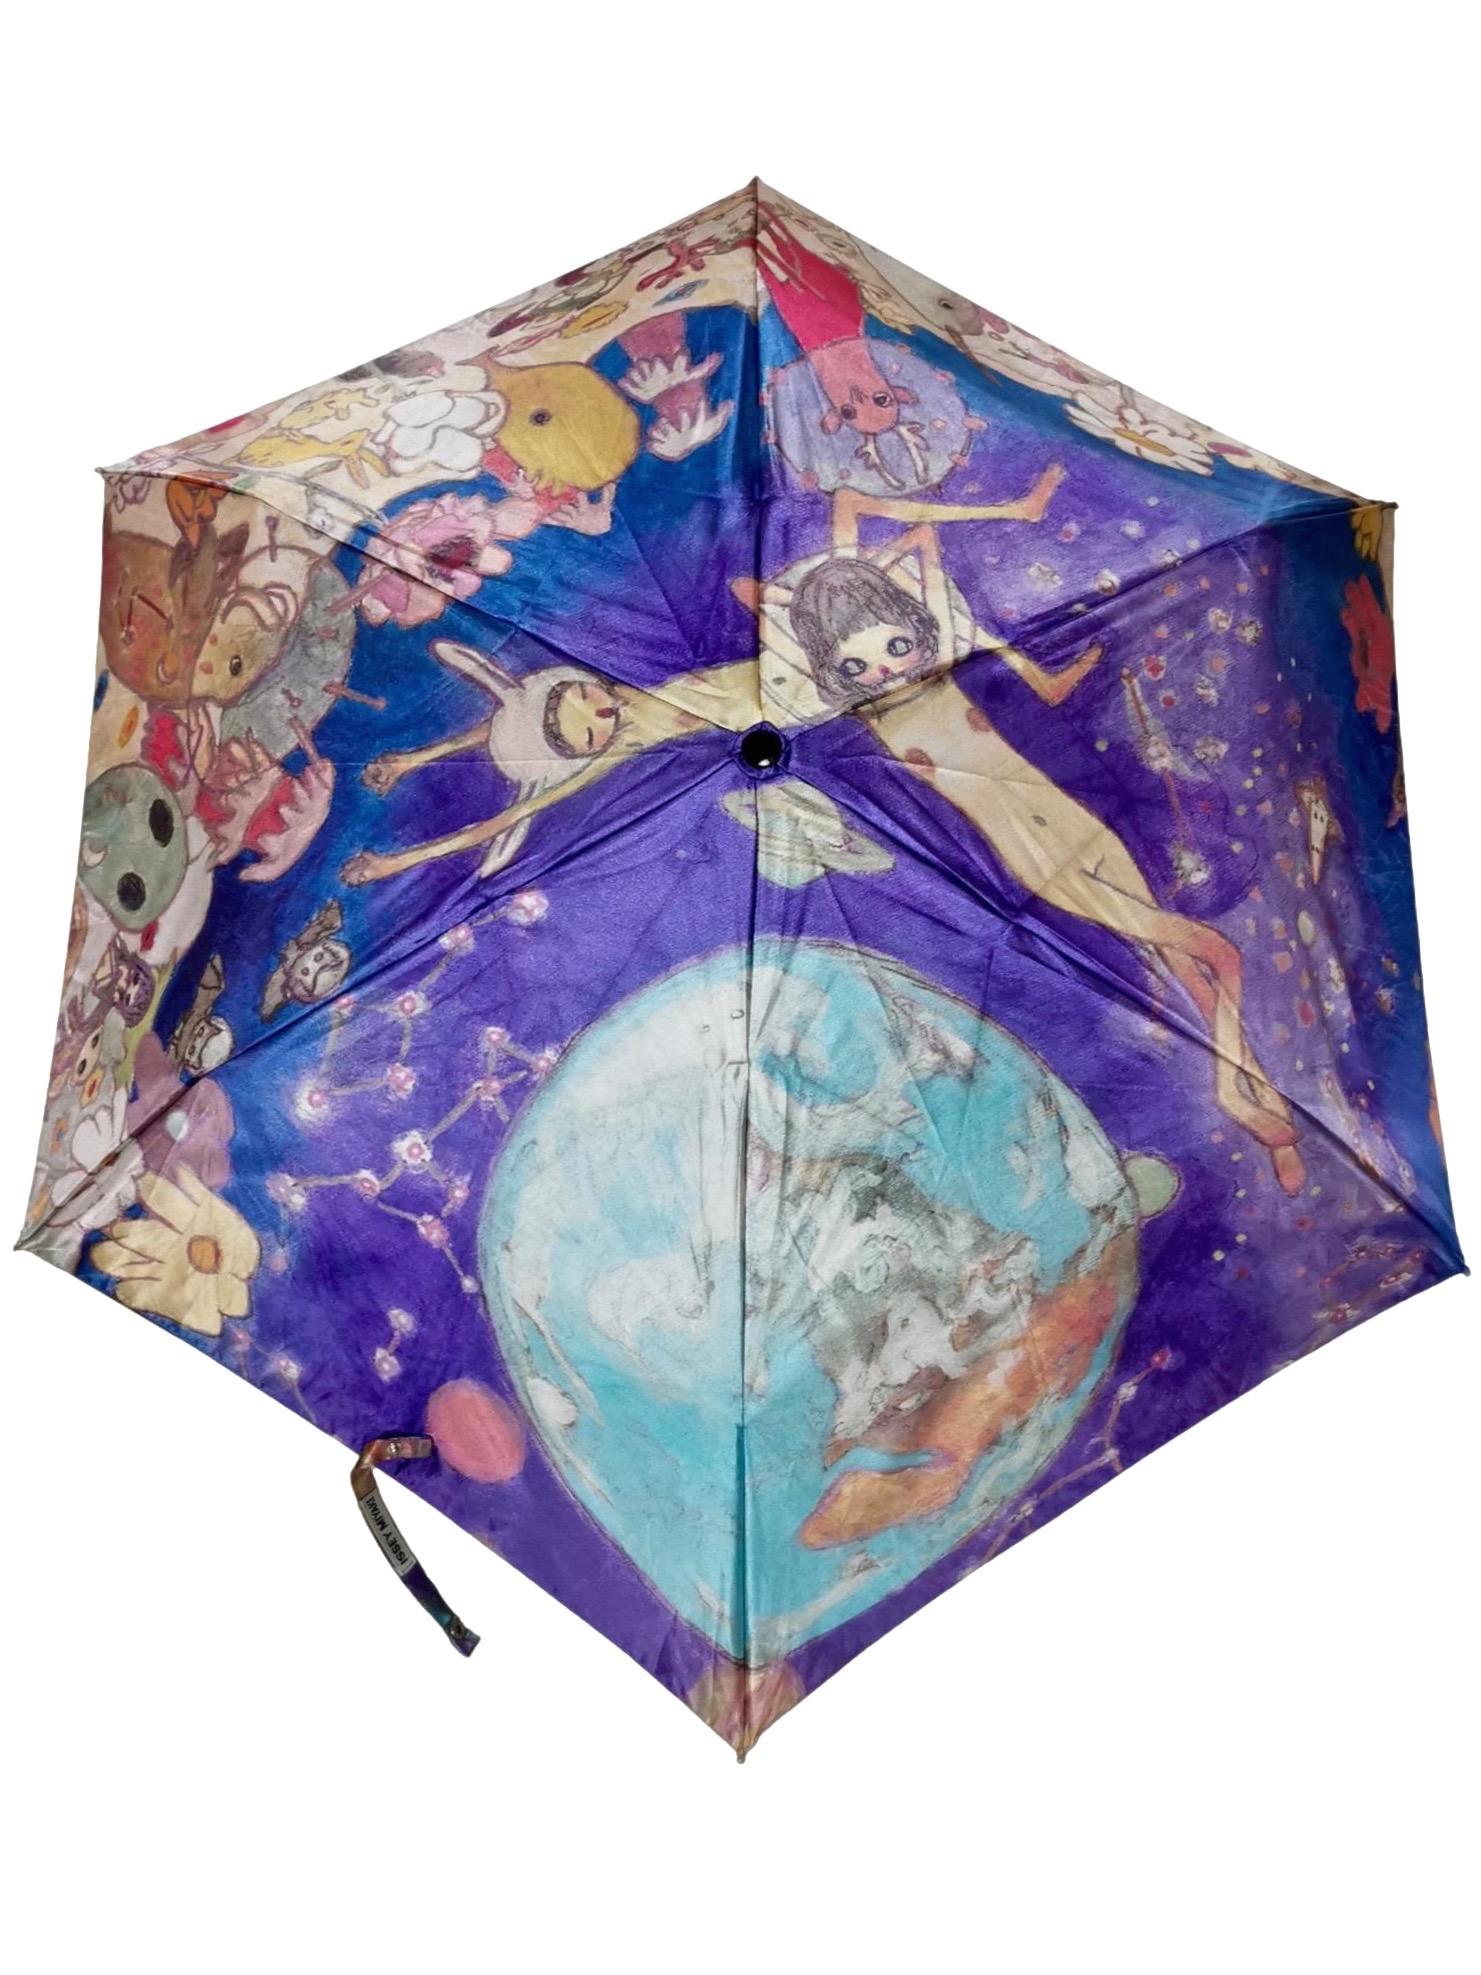 Issey Miyake Aya Takano 2004 Limited Edition Umbrella  In Excellent Condition For Sale In Bath, GB